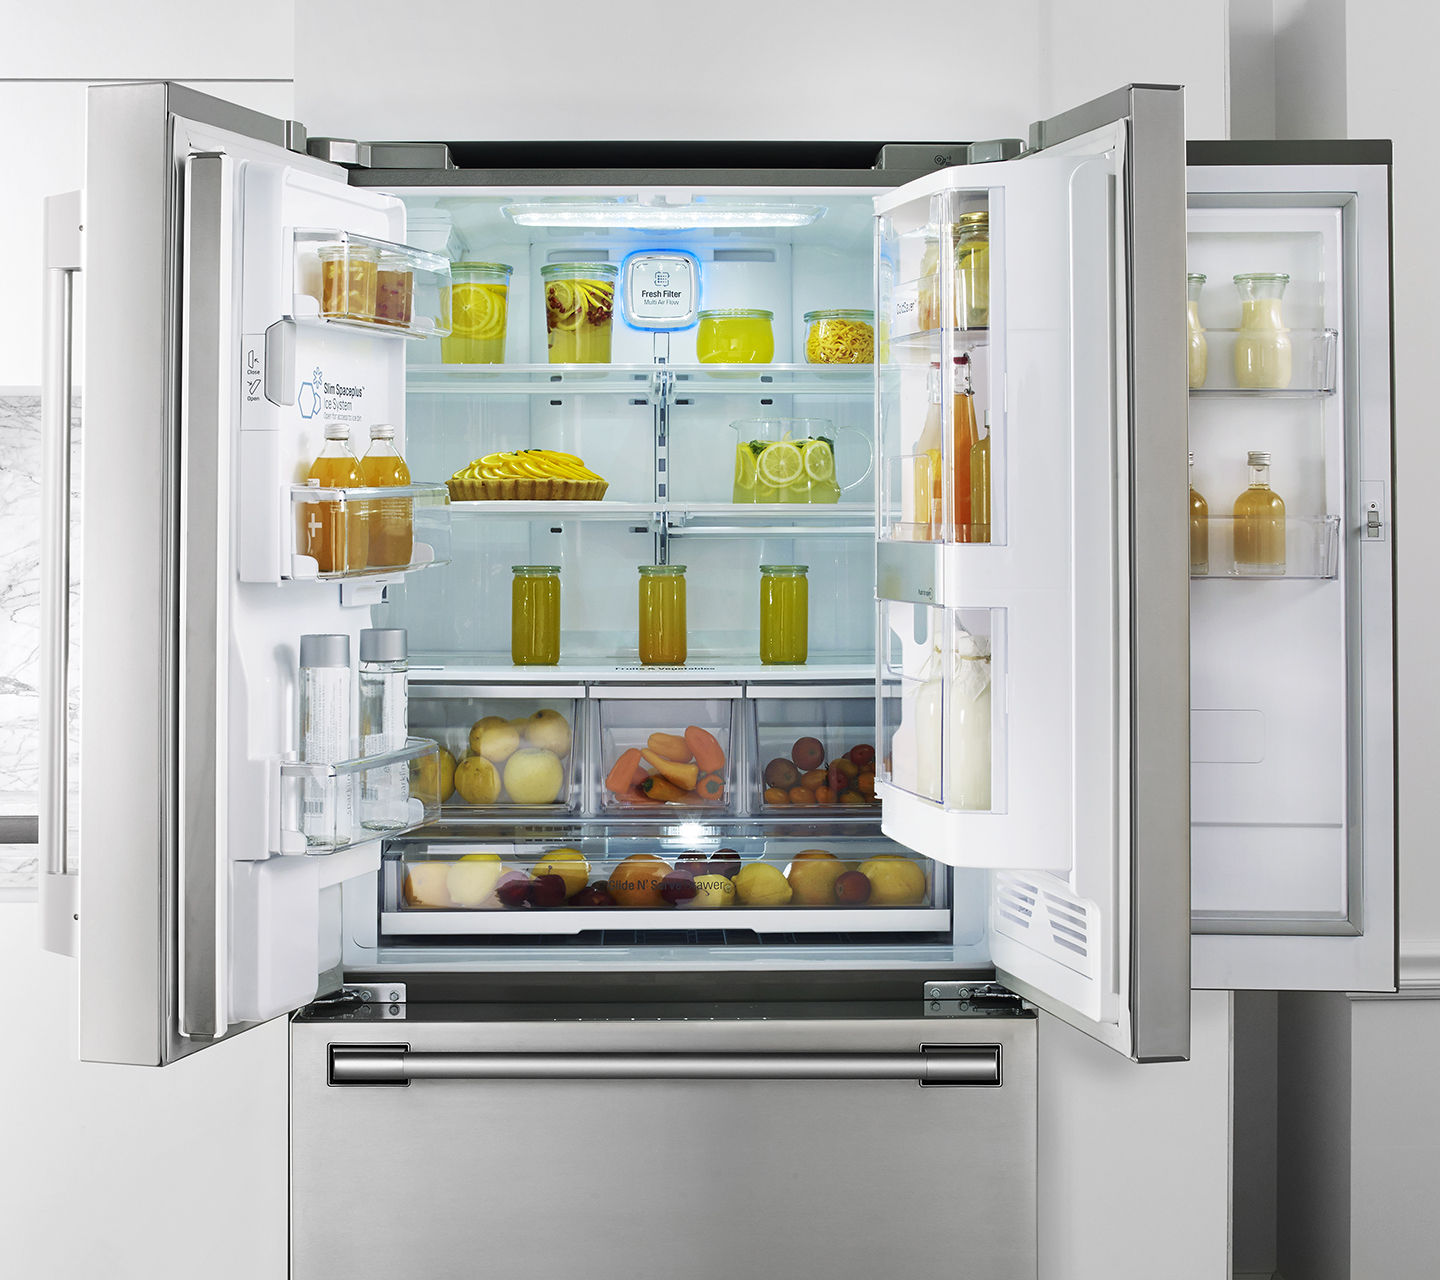 How To Organize French Door Refrigerator